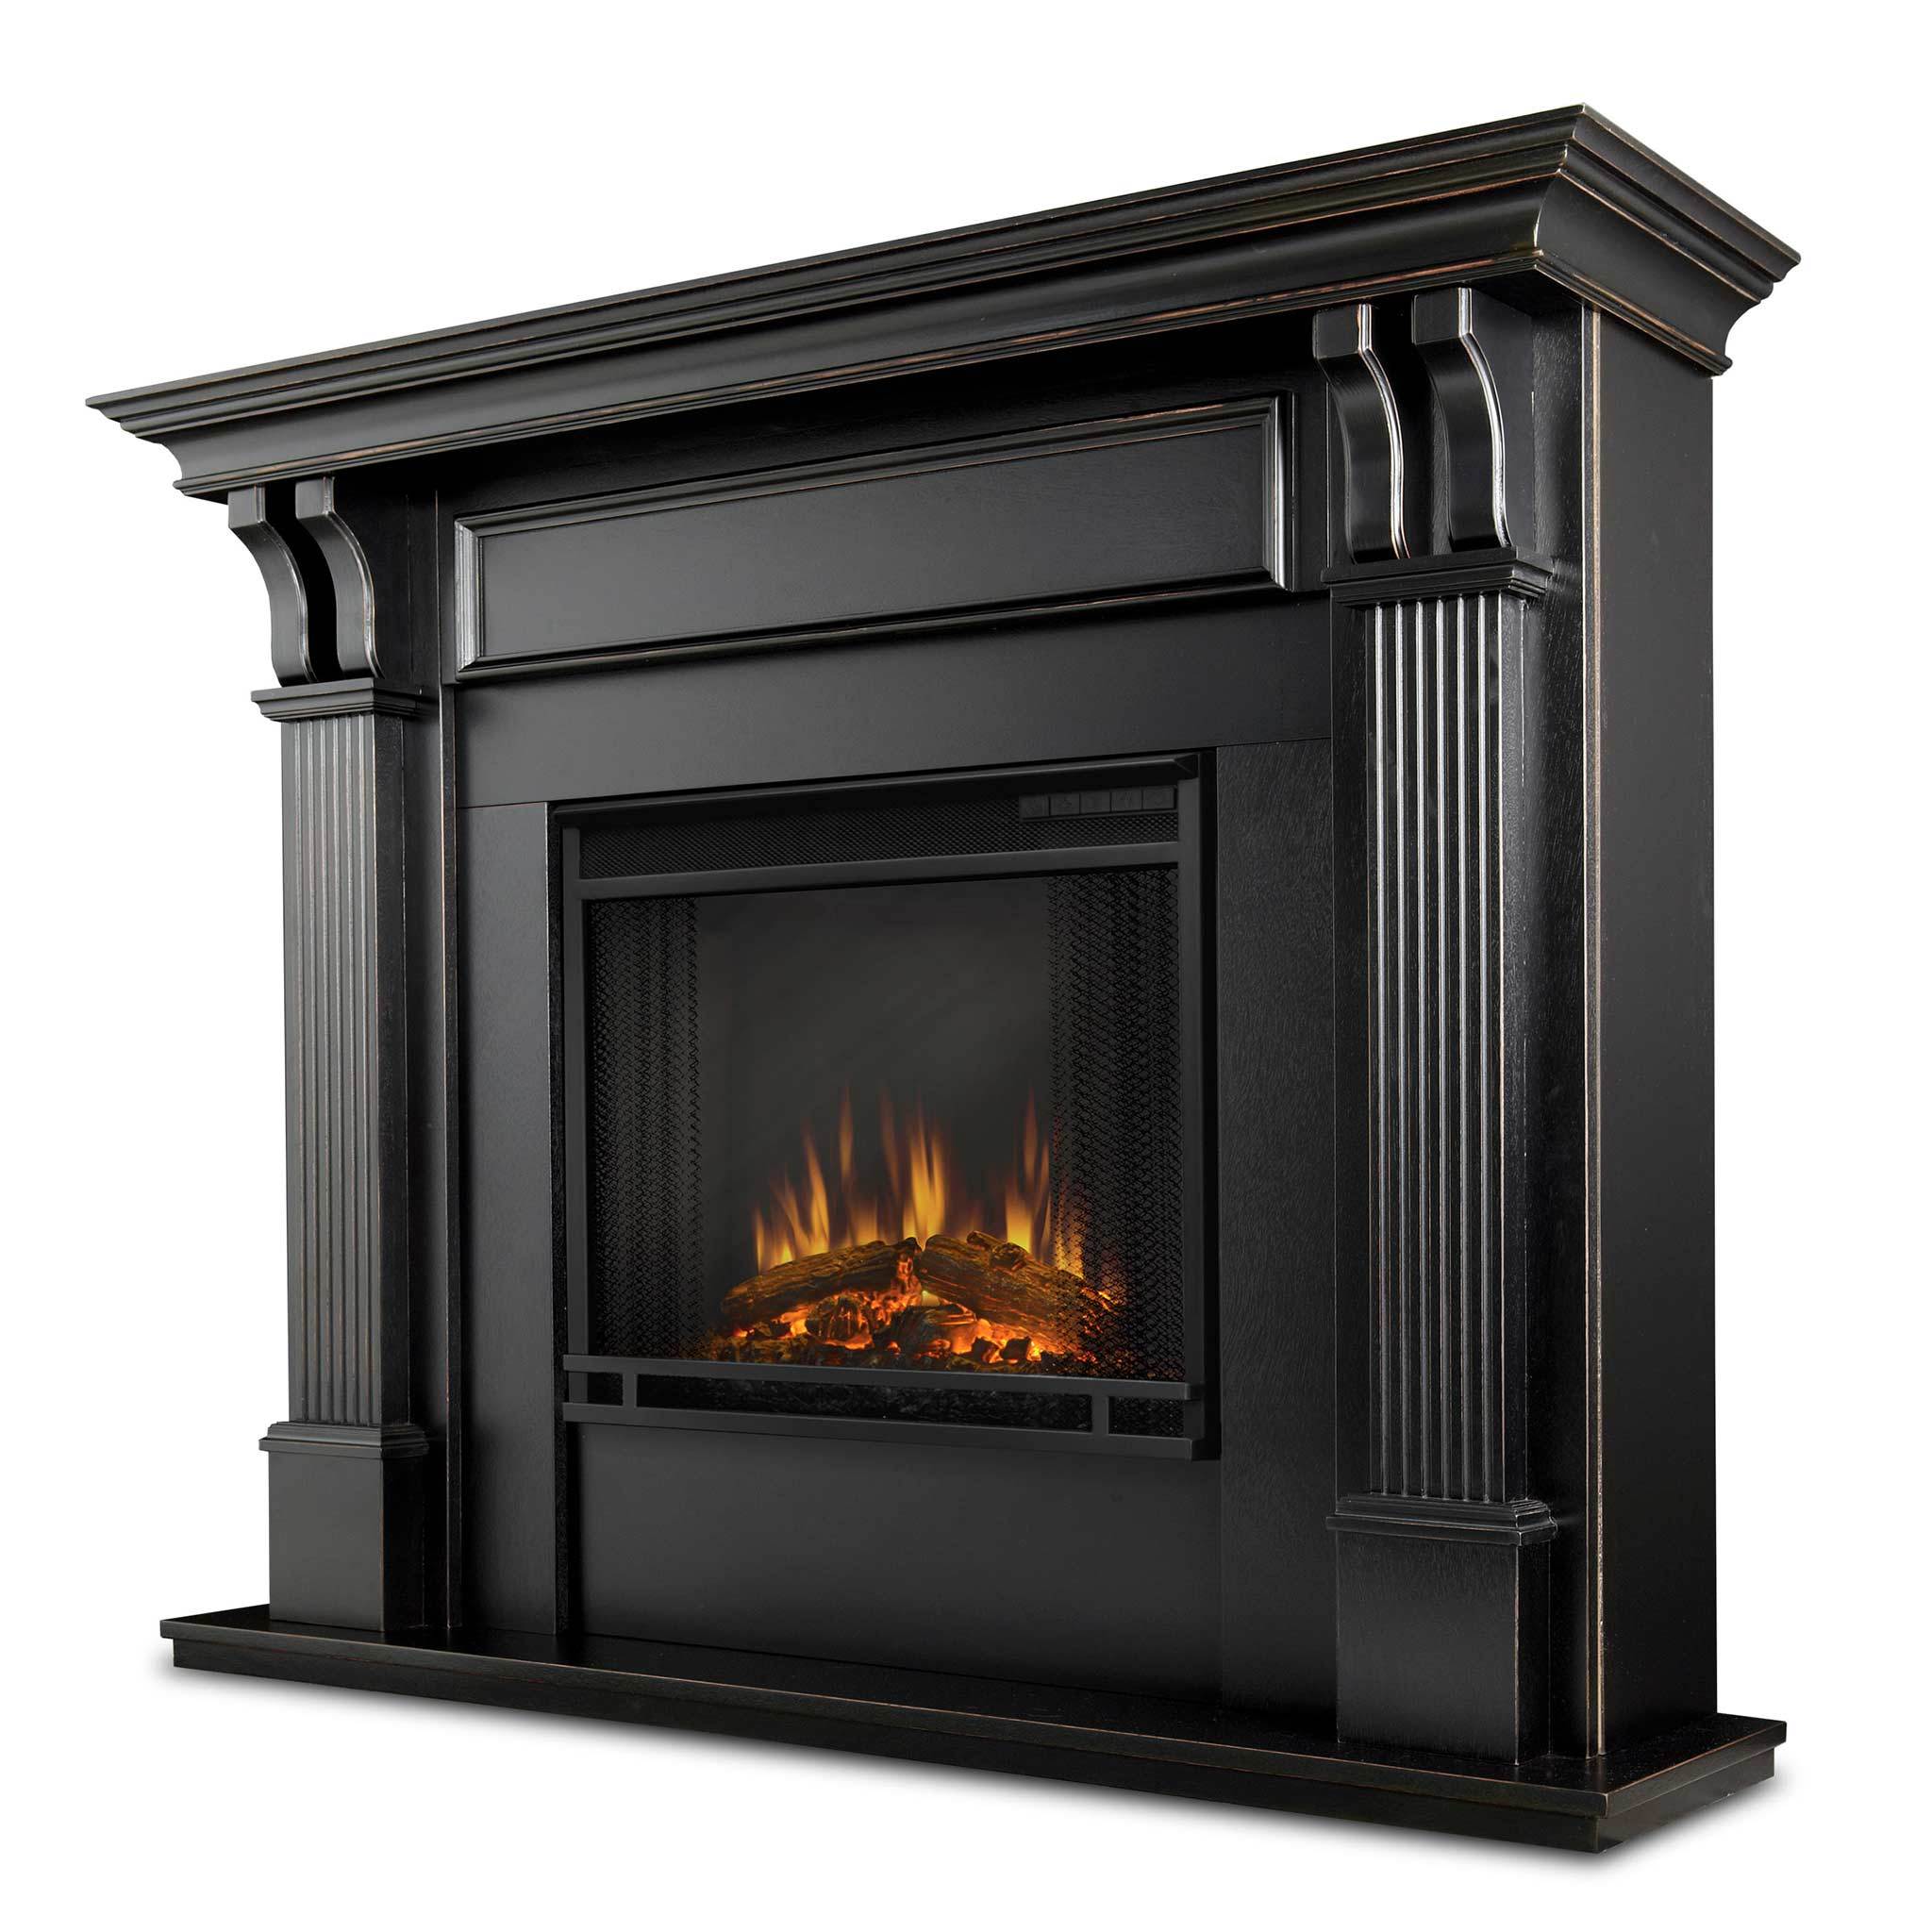 Real Flame Silverton Electric Fireplace Inspirational Duraflame Freestanding Infrared Quartz Fireplace Stove